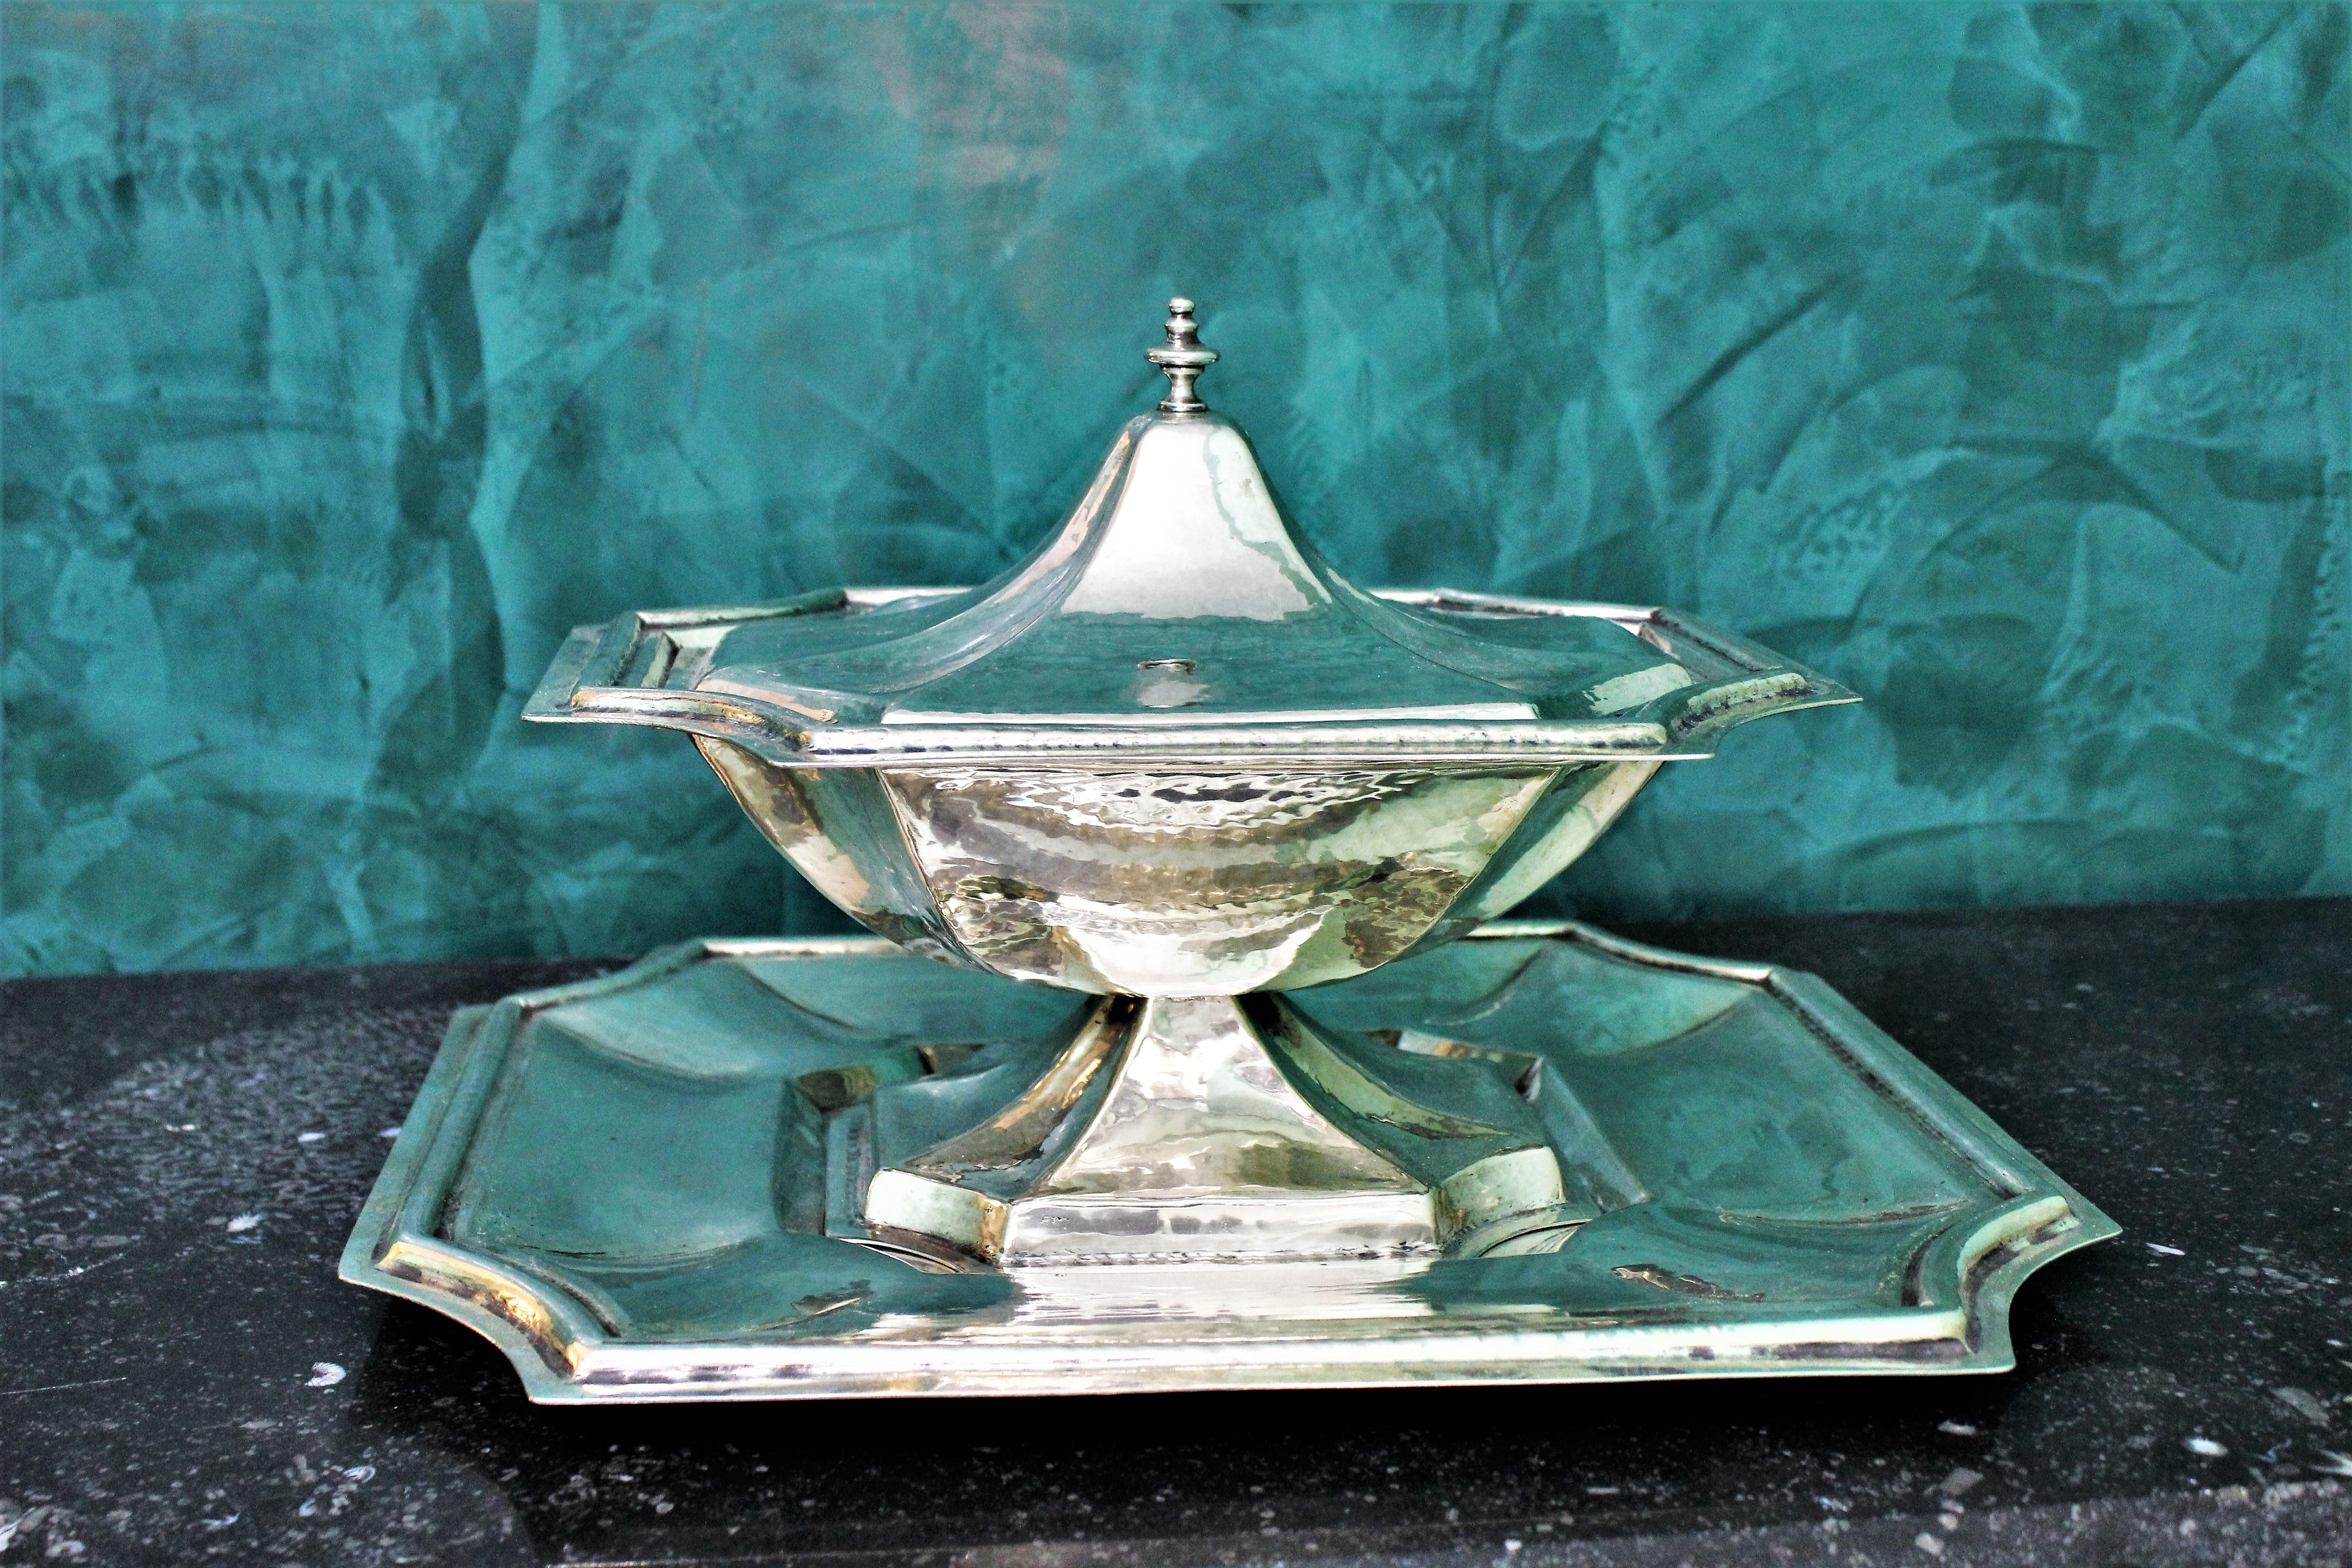 Beautiful Neoclassical style silver soup toureen with plate.
Hand worked and hammered, realized circa 1950s by silversmith Schiavon Paolo from Padova.
Silver 800/1000.
Dimensions: Plate: 35.5 x 30 cm, height 20cm
Soup toureen: 27 x 20.5 cm,